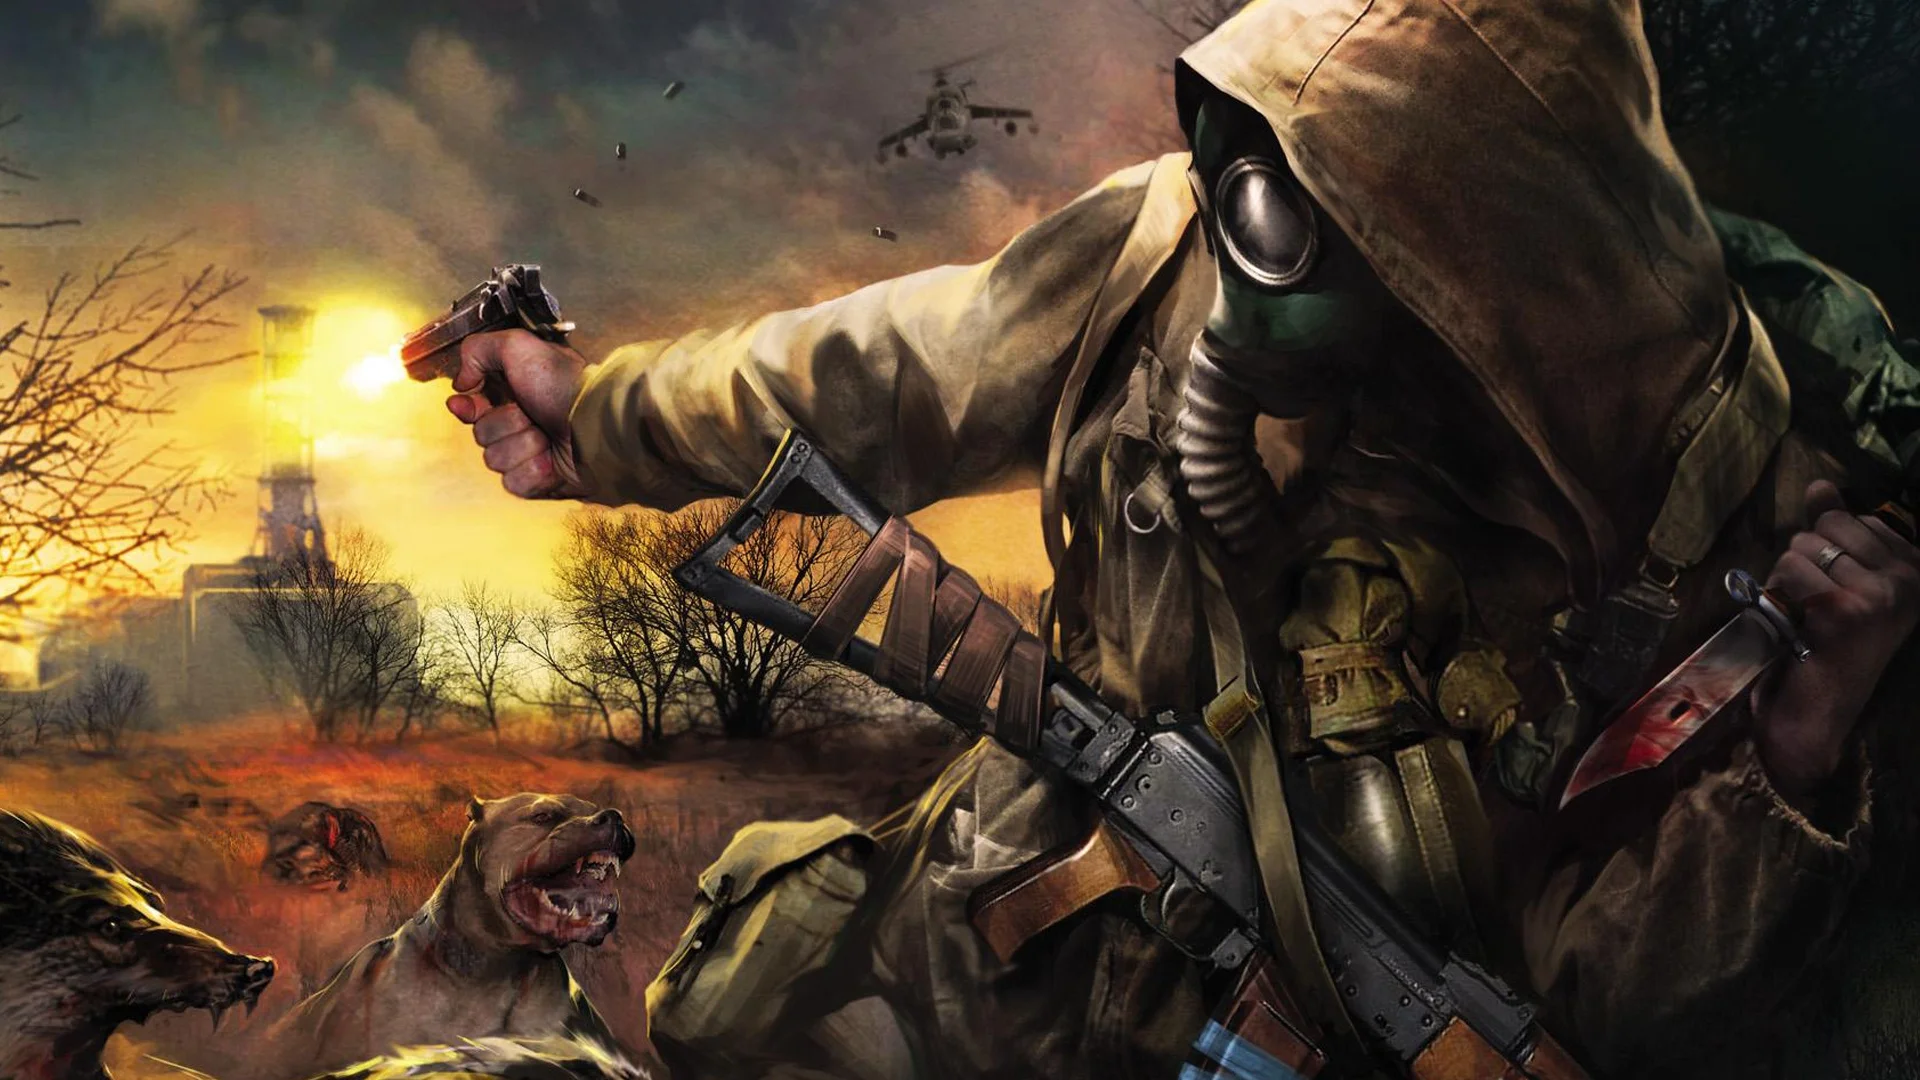 Screenshots from the unreleased S.T.A.L.K.E.R. have surfaced online. for PlayStation Portable